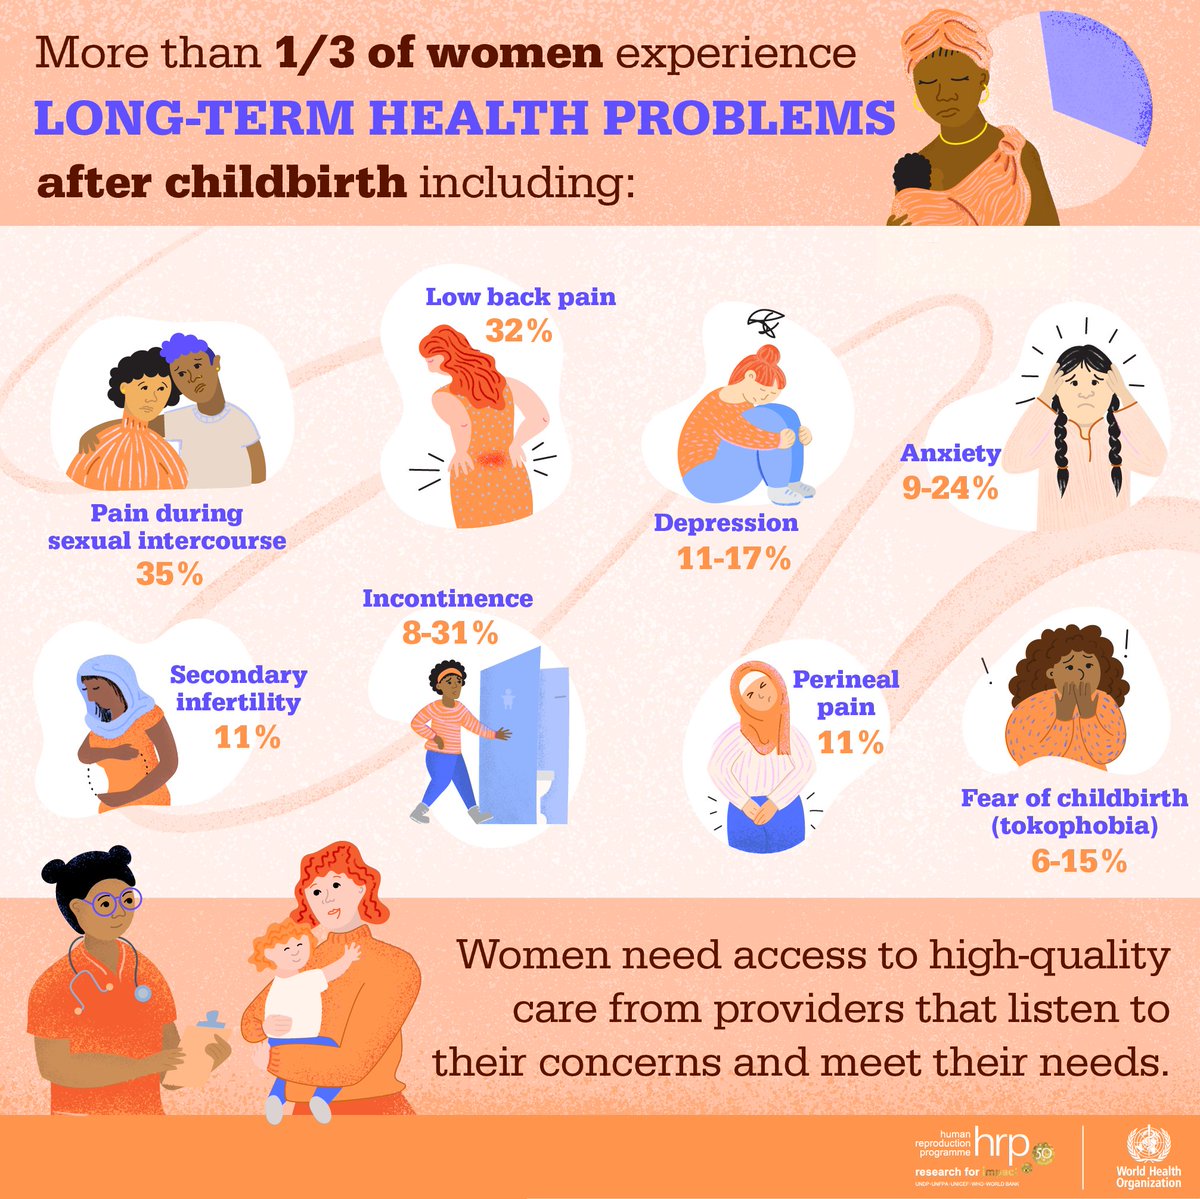 More than 1/3 of women experience lasting health problems after childbirth, including mental health conditions. On #WMMHDay, explore a Series from @eClinicalMed & @LancetGH calling for a life-course approach to address women’s individual needs & concerns: hubs.li/Q02vvvyM0